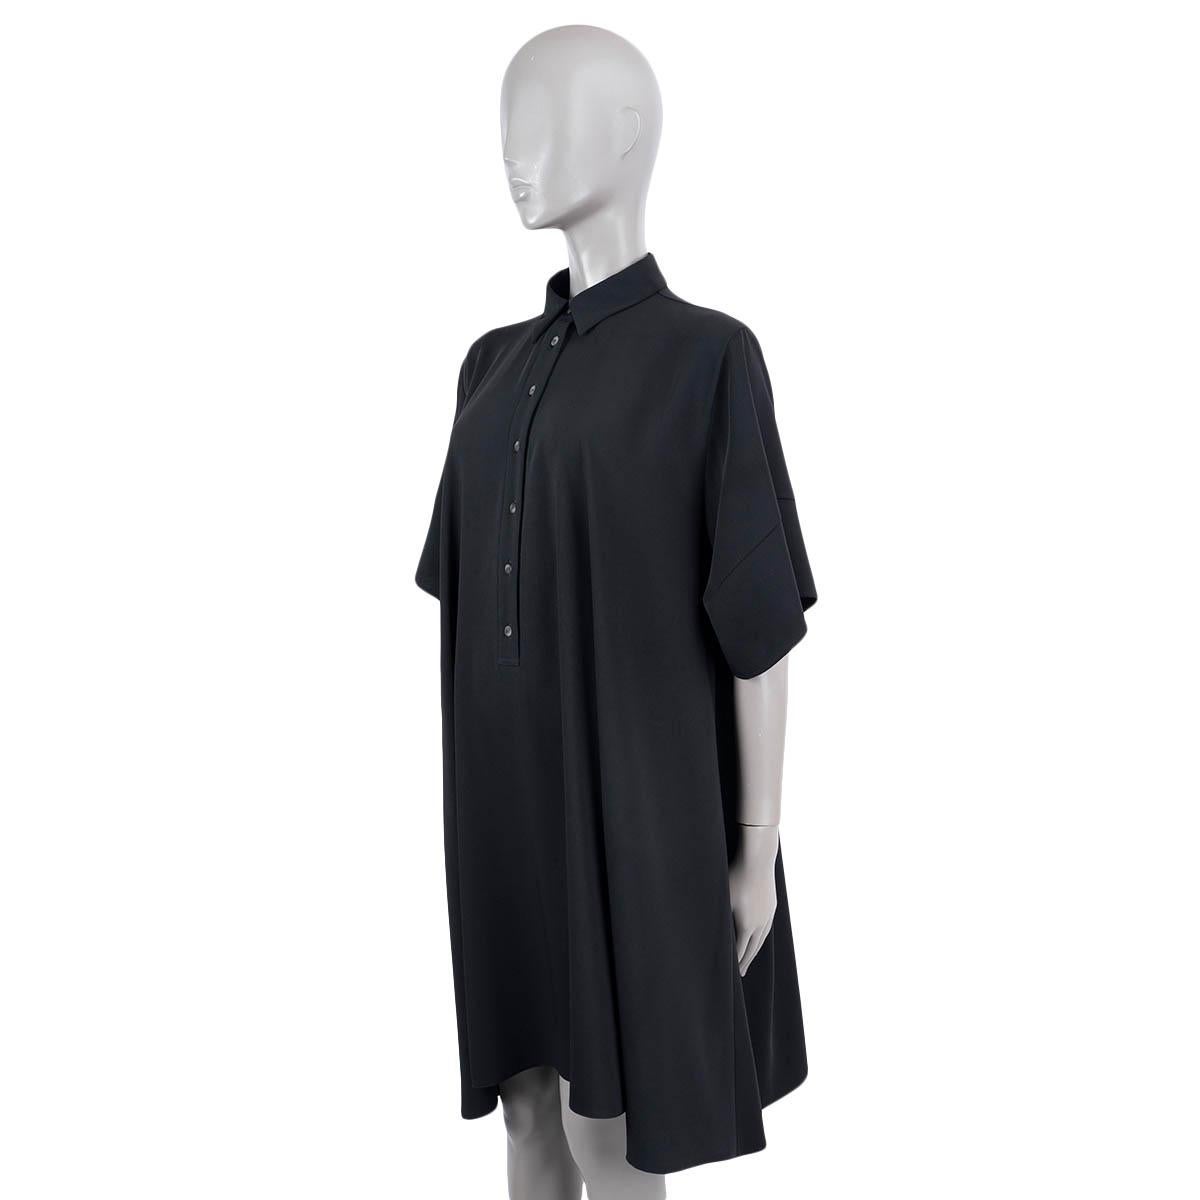 MM6 MARTIN MARGIELA black polyester SHORT SLEEVE SHIRT Dress 46 XL In Excellent Condition For Sale In Zürich, CH